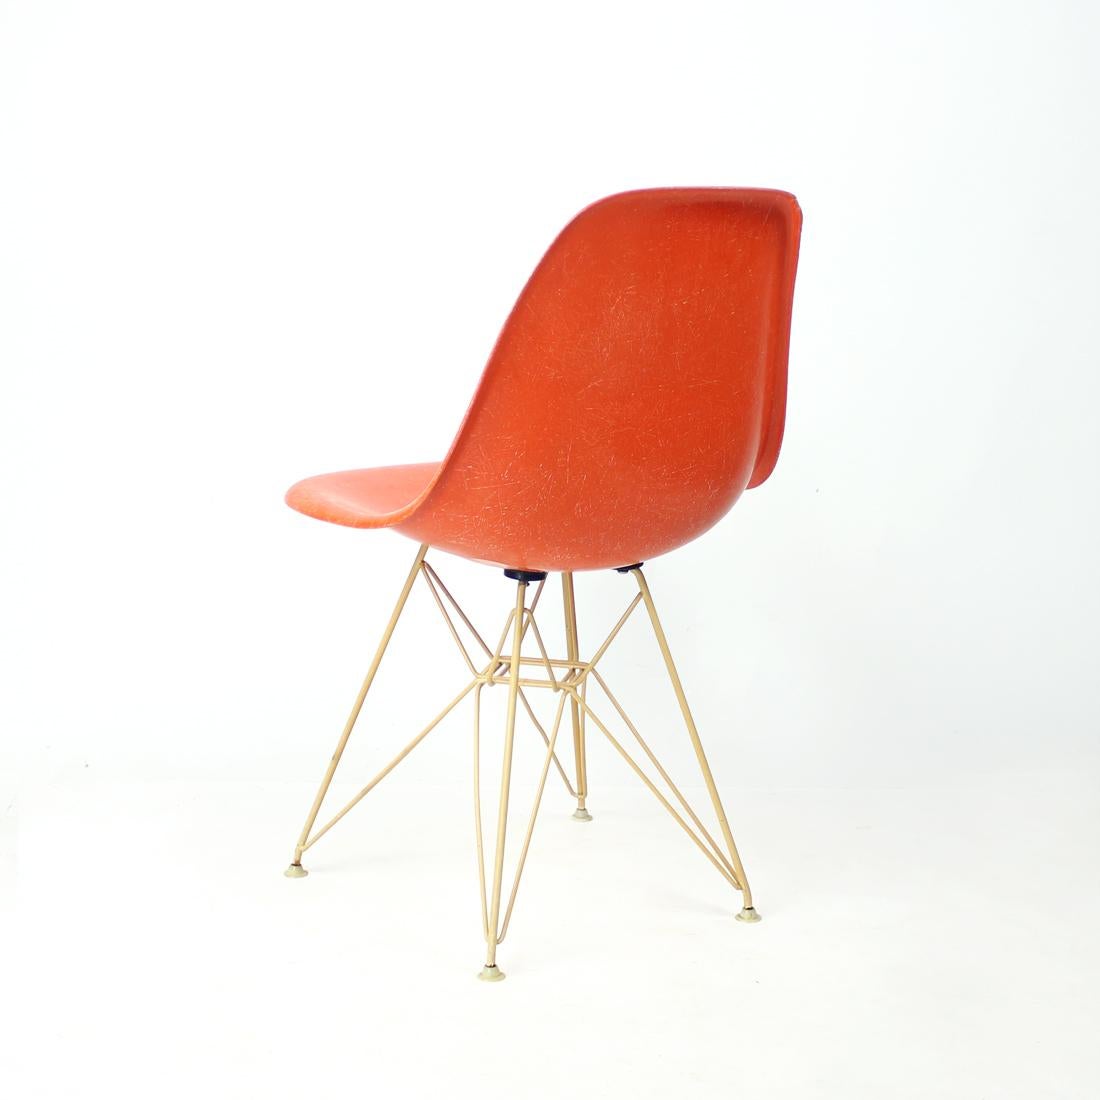 Mid-20th Century Orange Eiffel Shell Chair By Charles And Ray Eames For Herman Miller, 1960s For Sale